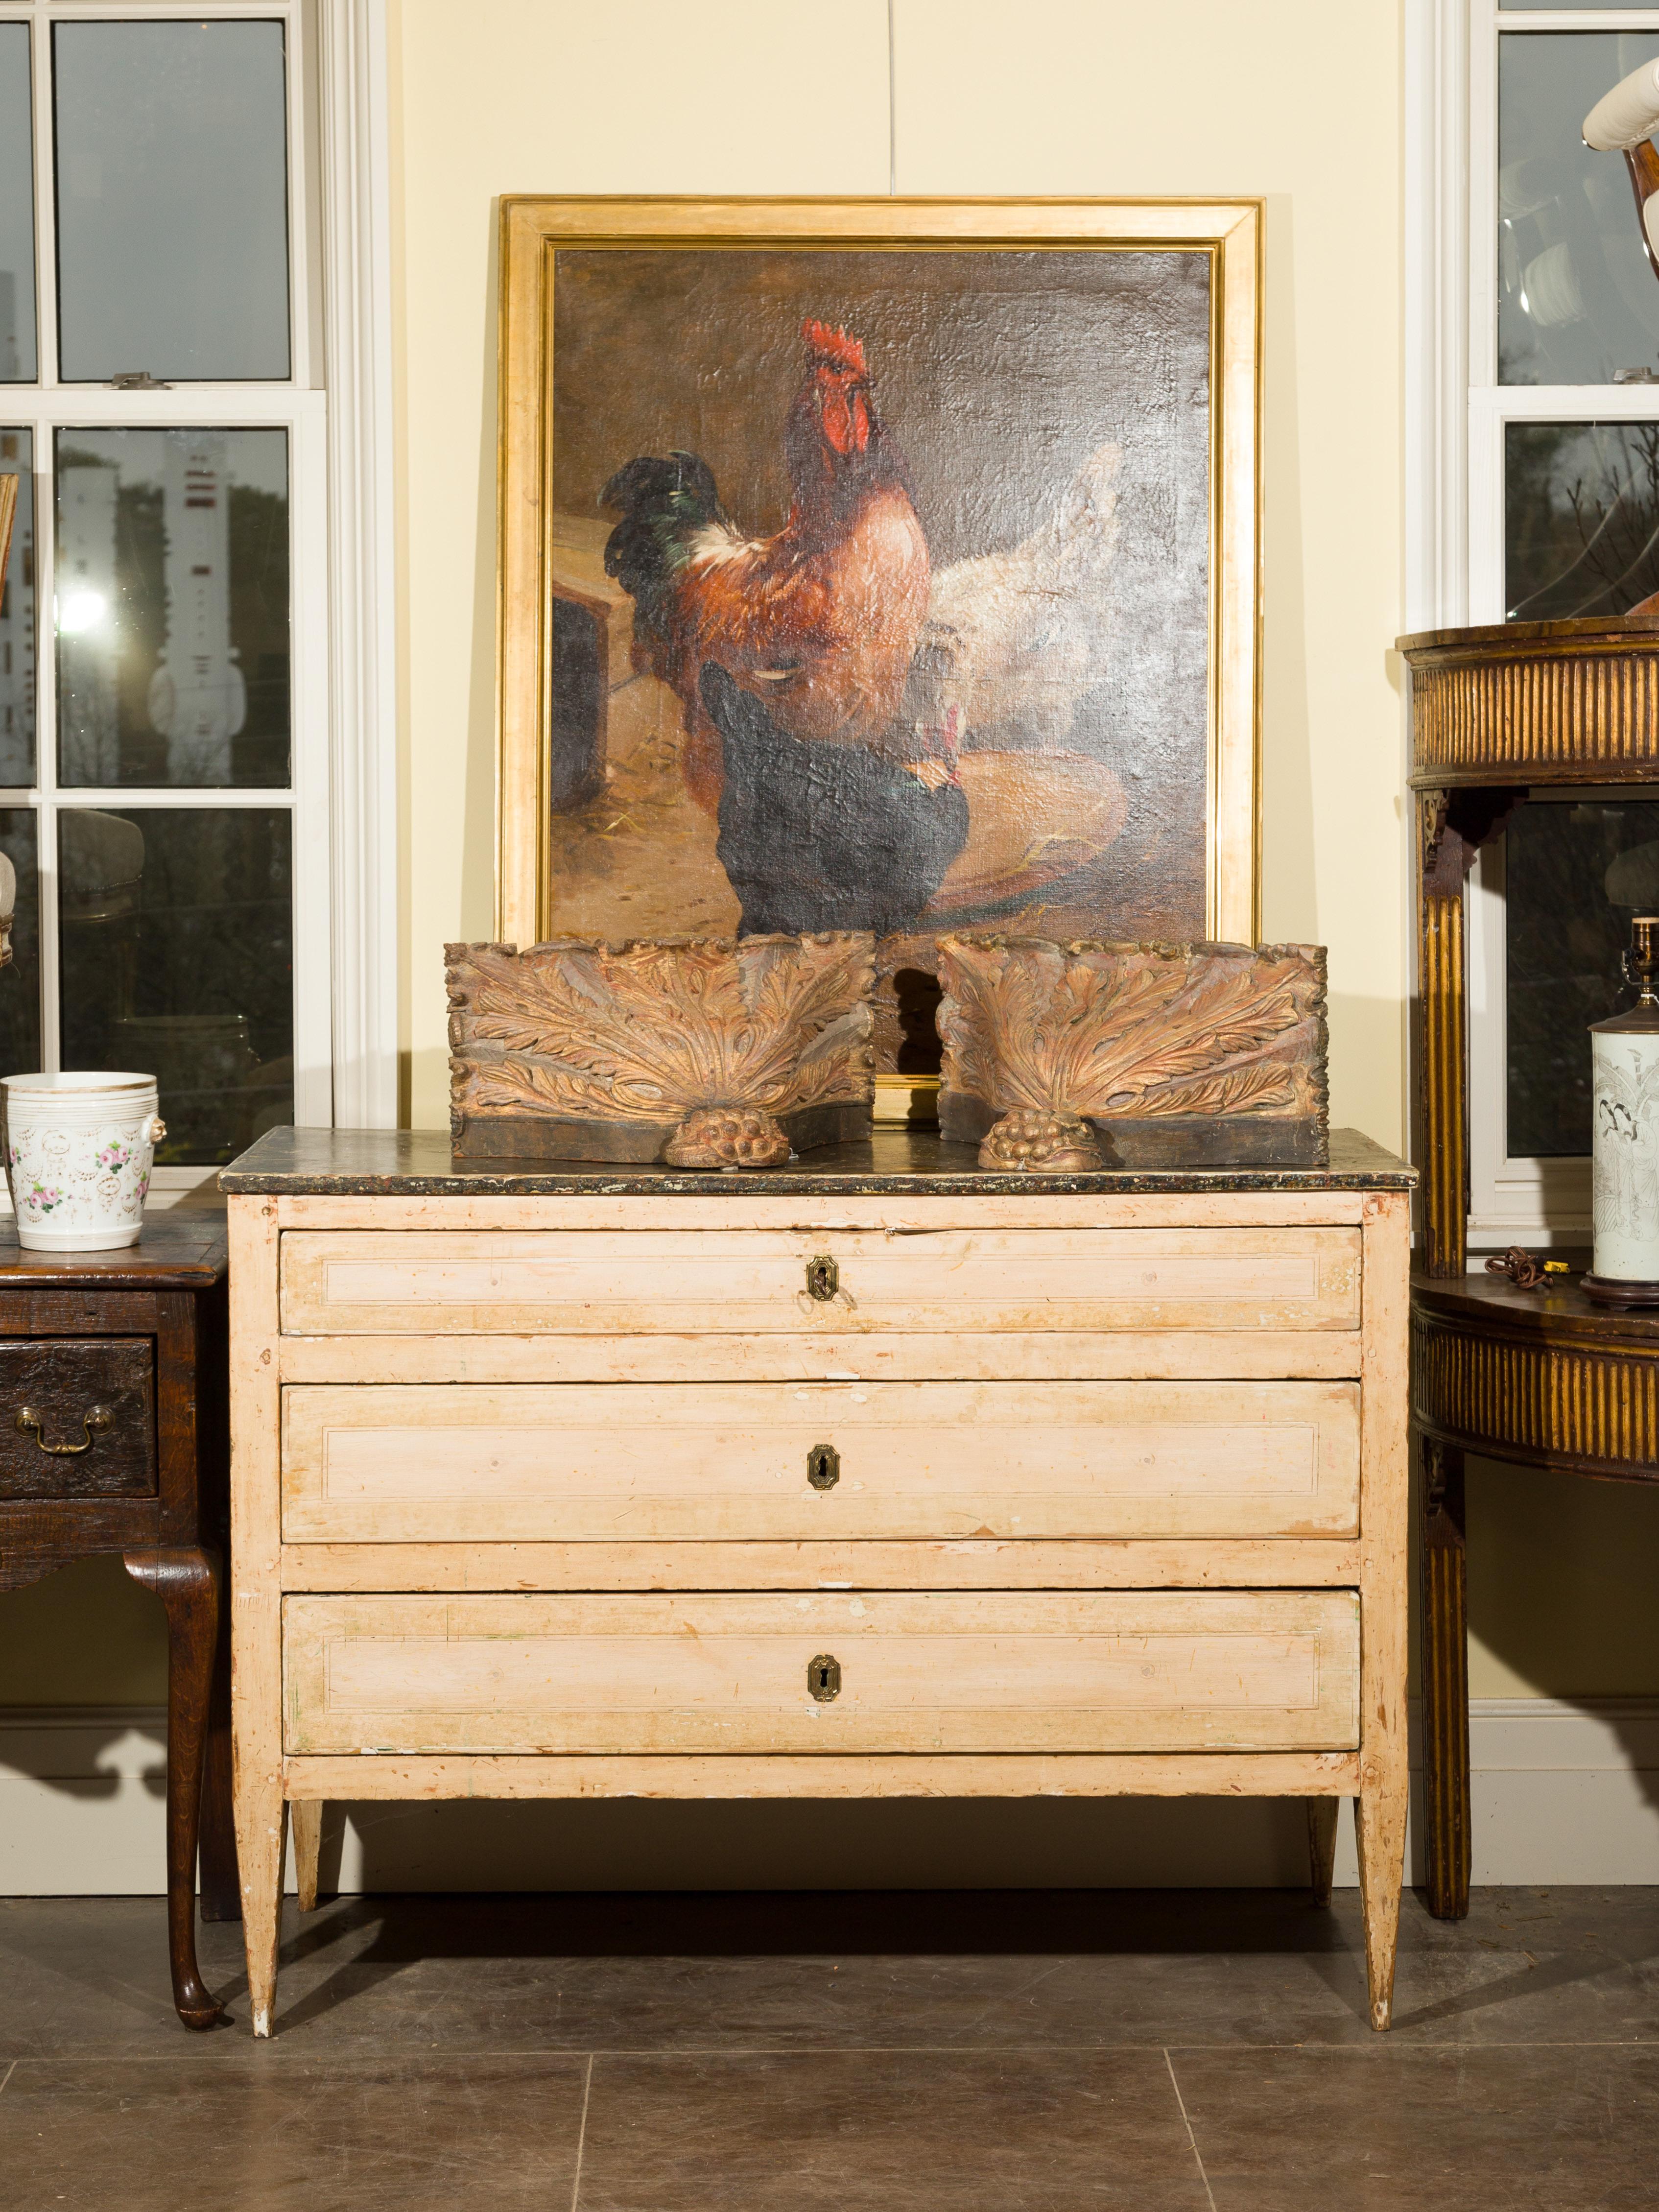 This Italian painted three-drawer commode from the early 19th century features a dark rectangular top over a tan colored body with traces of green accents. Three drawers make up the front, the upper one being thinner than the two others. The